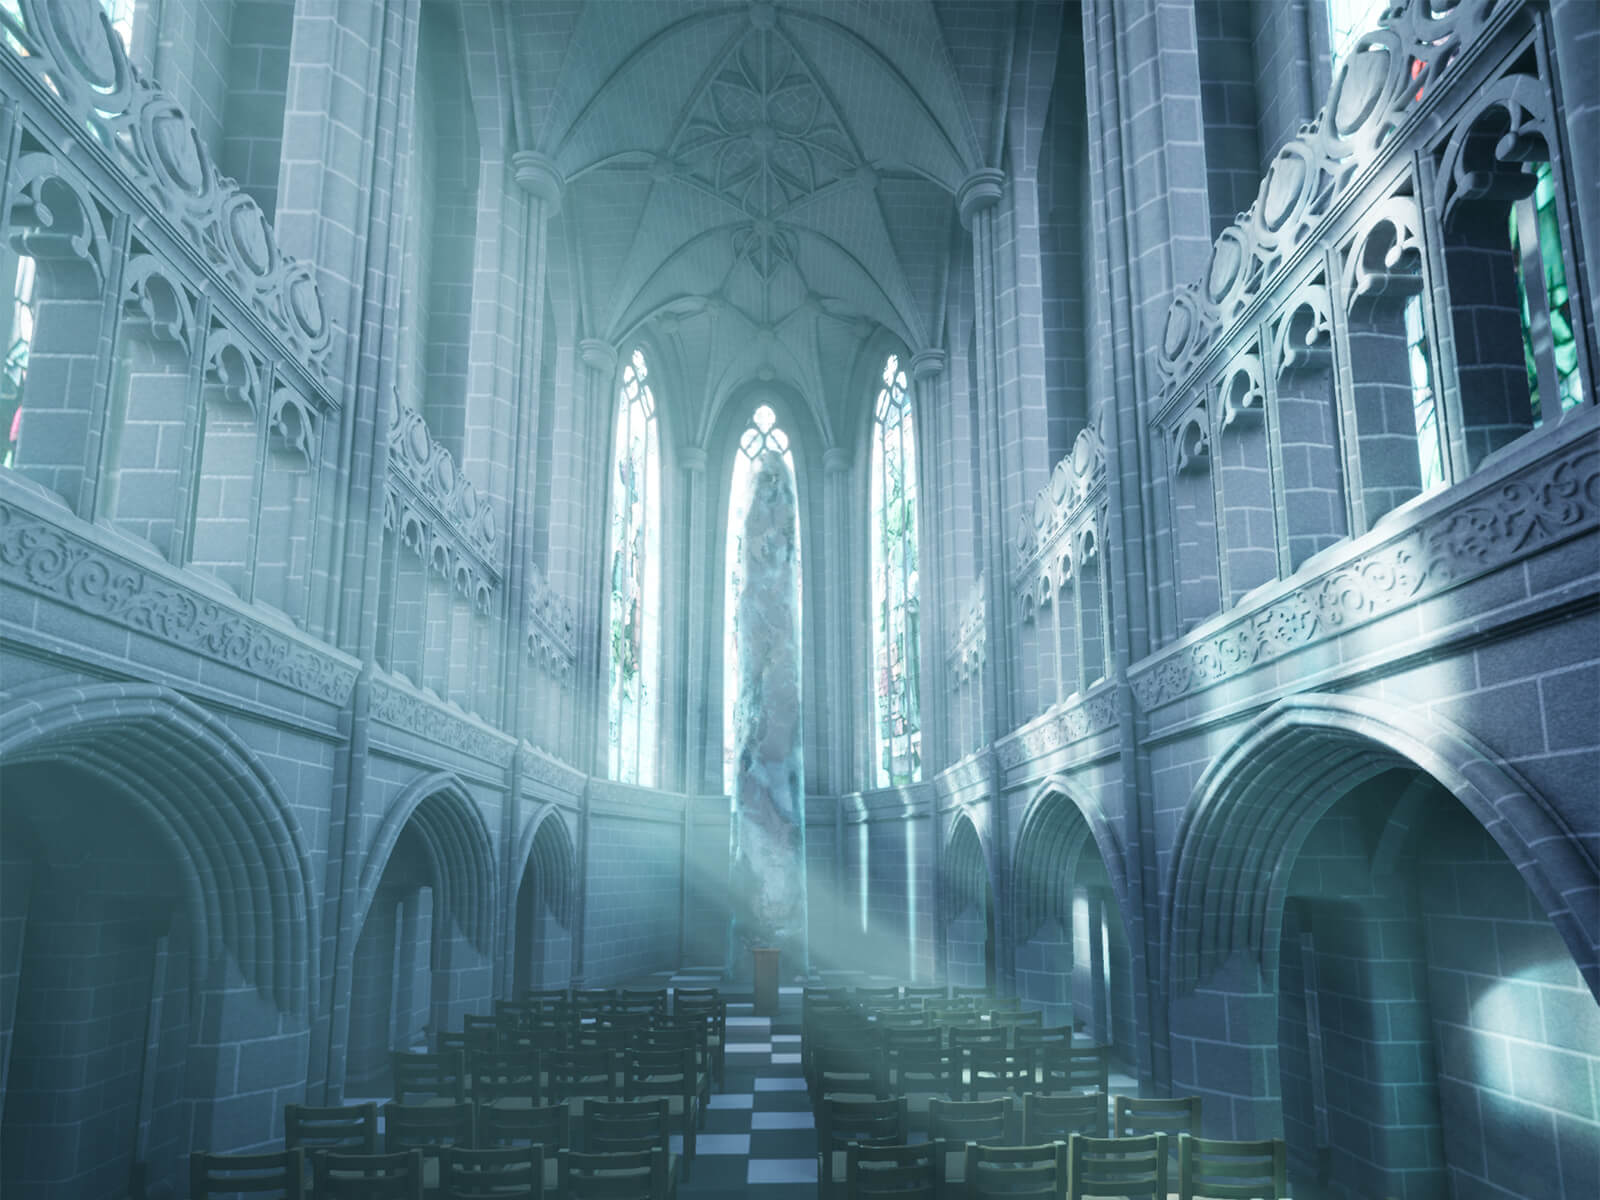 A cathedral with chairs lined up, light streaming through high windows